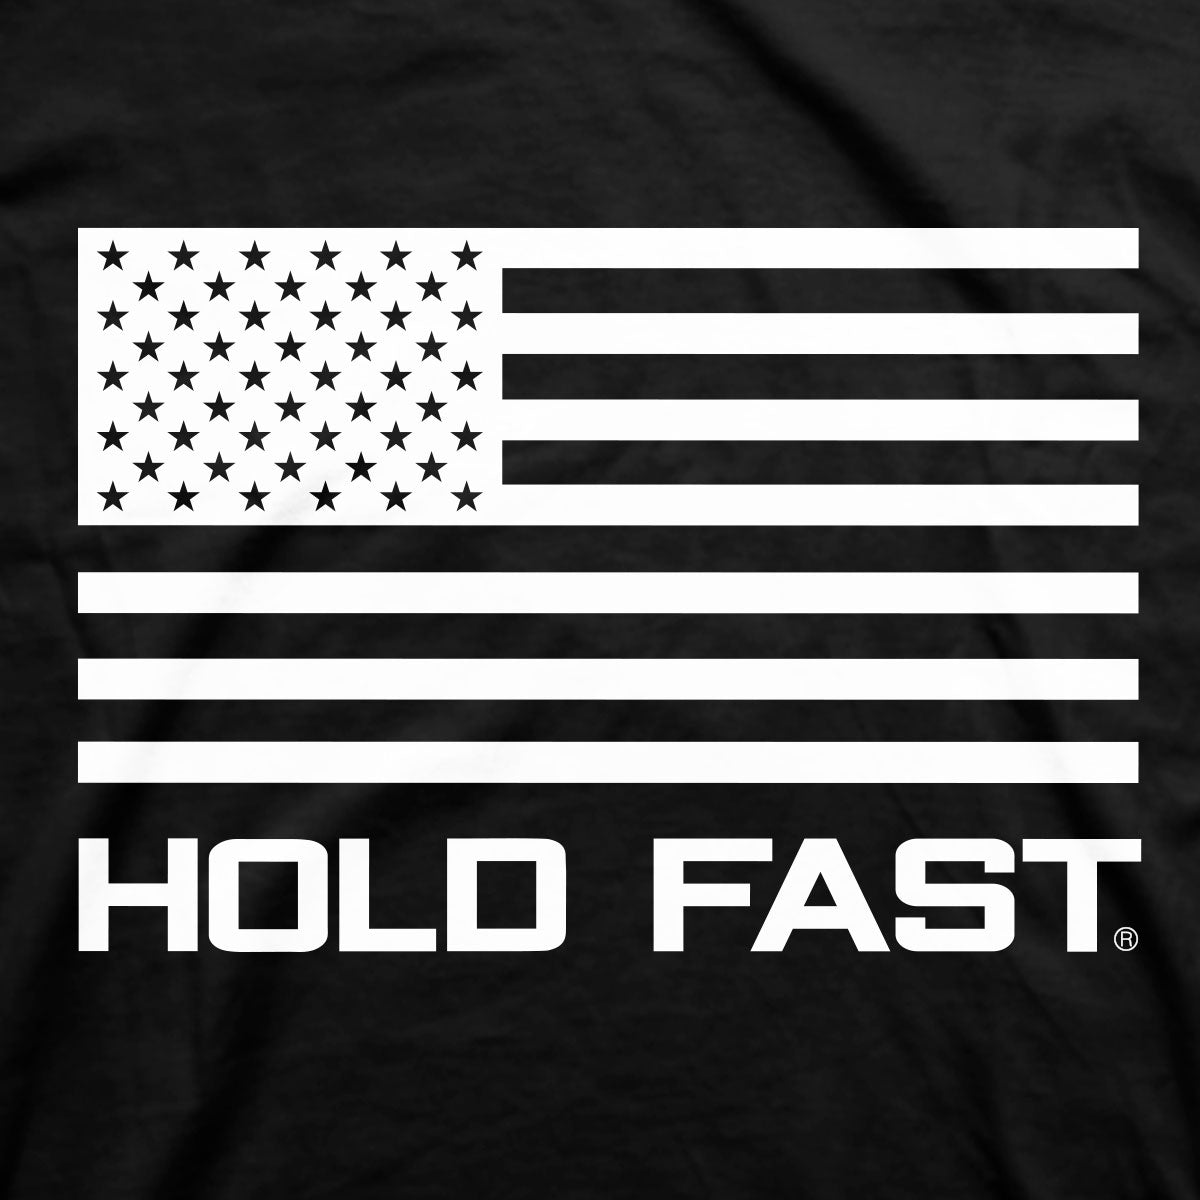 HOLD FAST Freedom of Religion T-Shirt